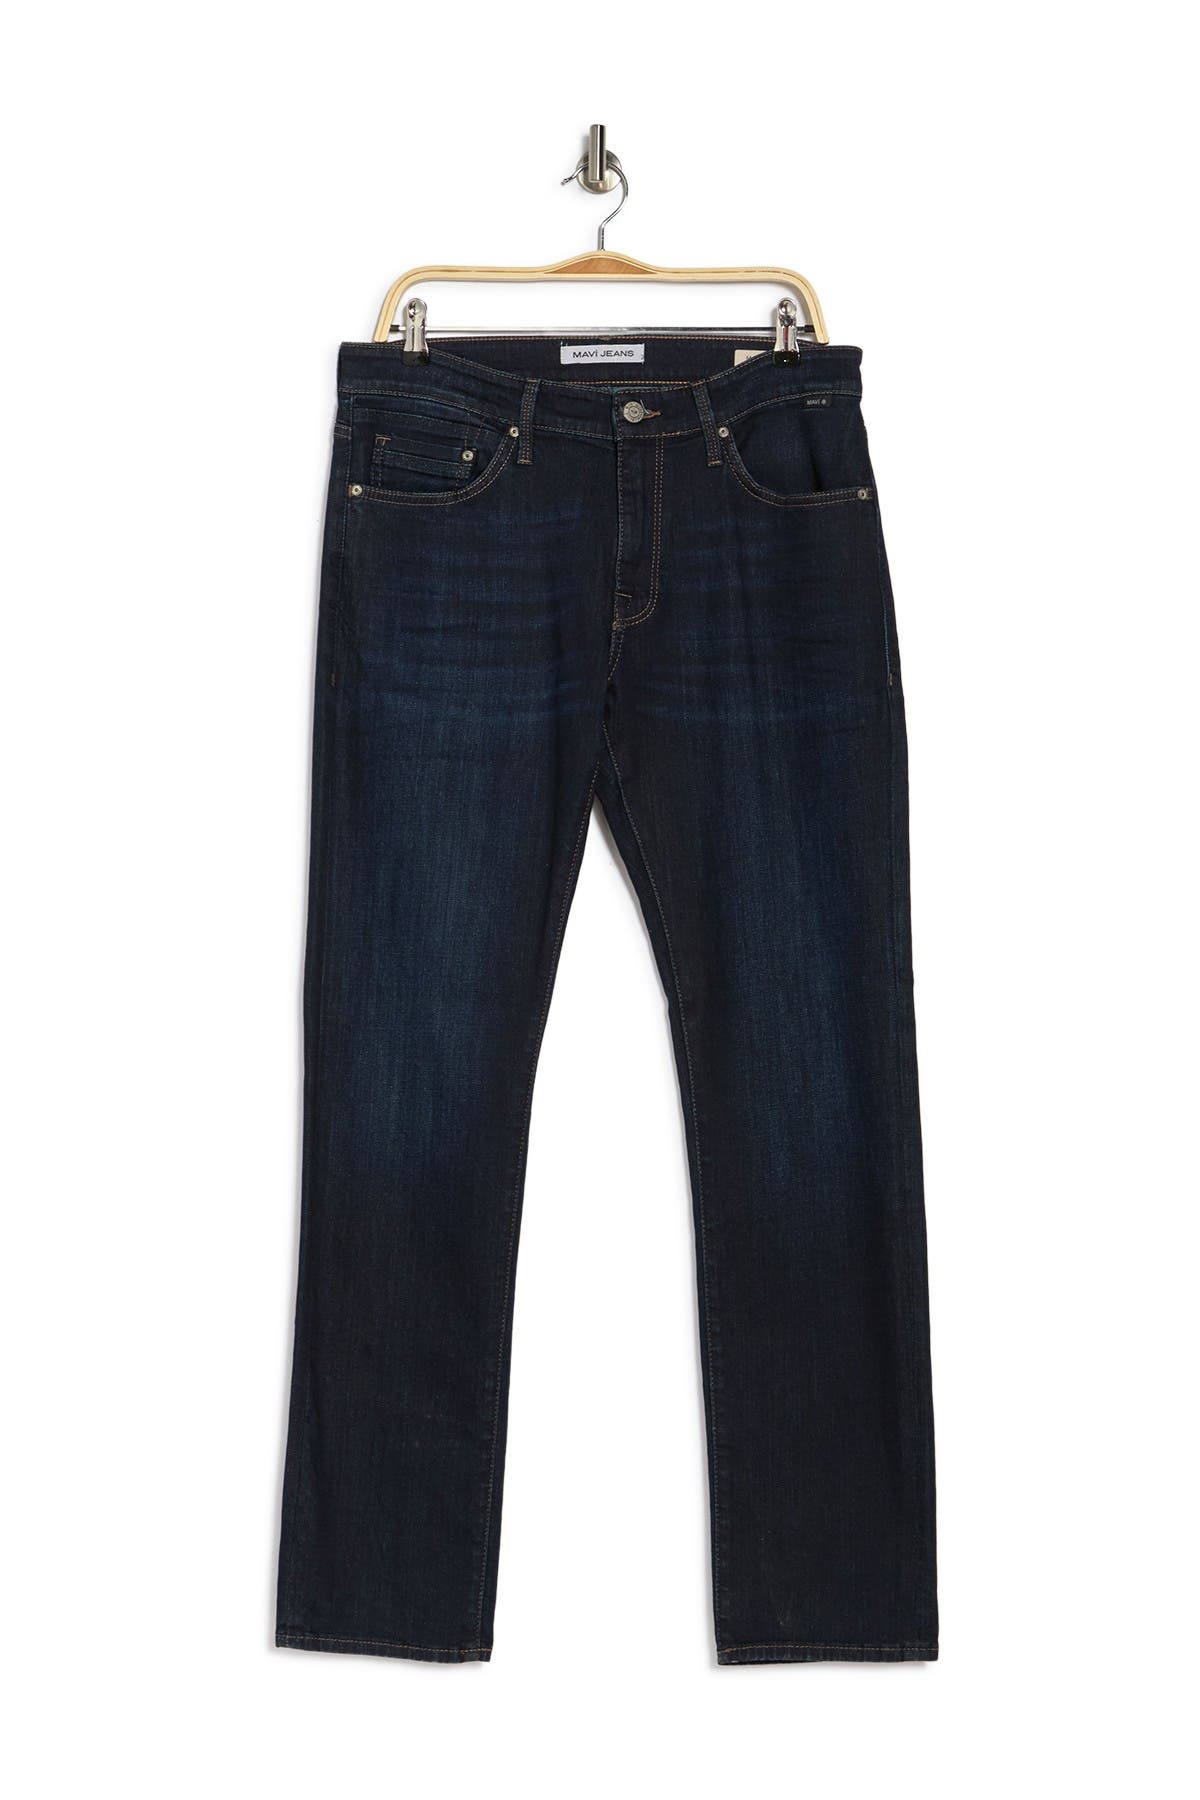 Mavi Marcus Brushed Jeans In Nse Brushed New York